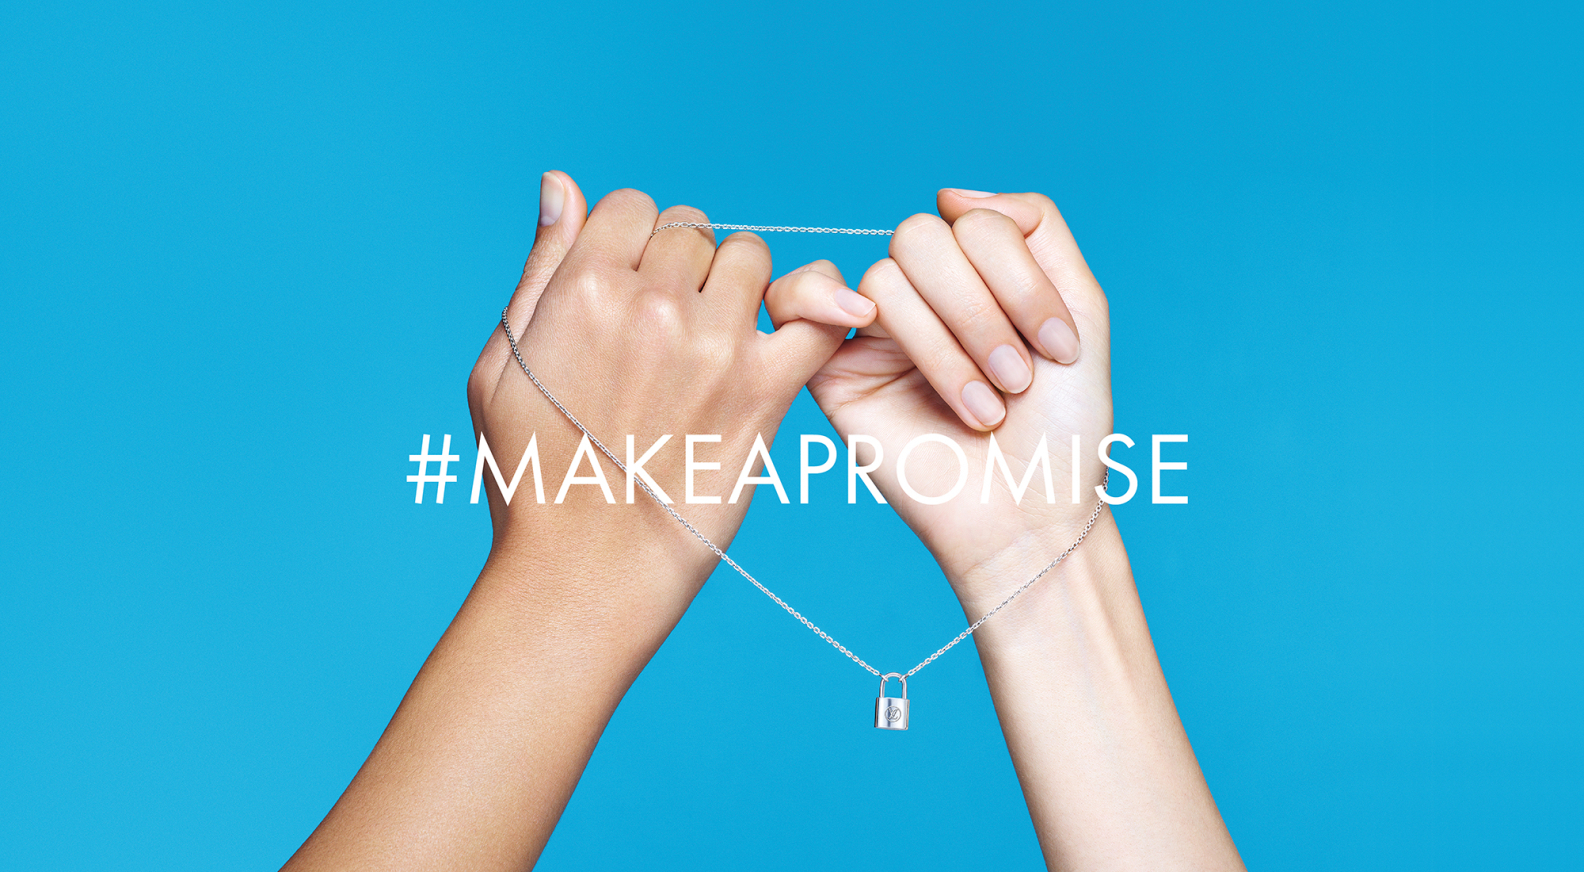 MAKEAPROMISE: Louis Vuitton partners with UNICEF - LVMH